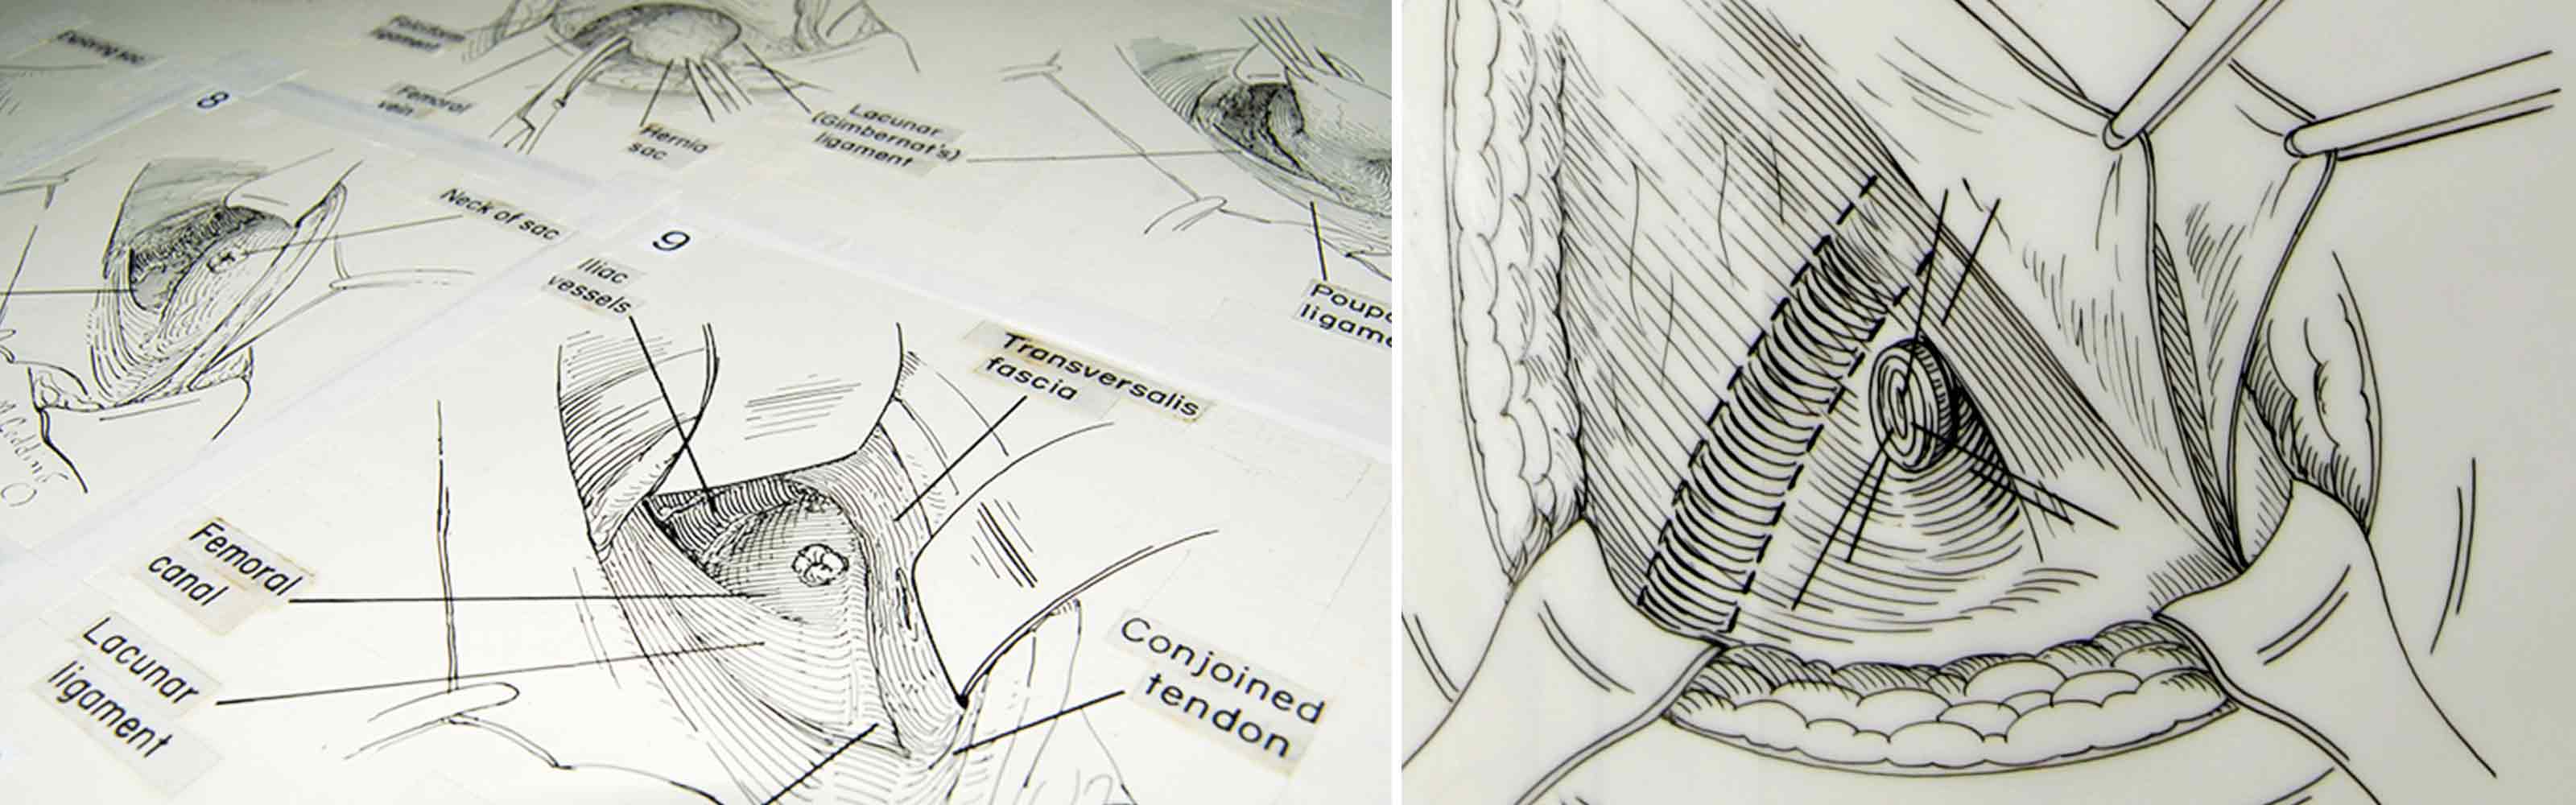 Atlas-of-Surgical-Operations illustrations